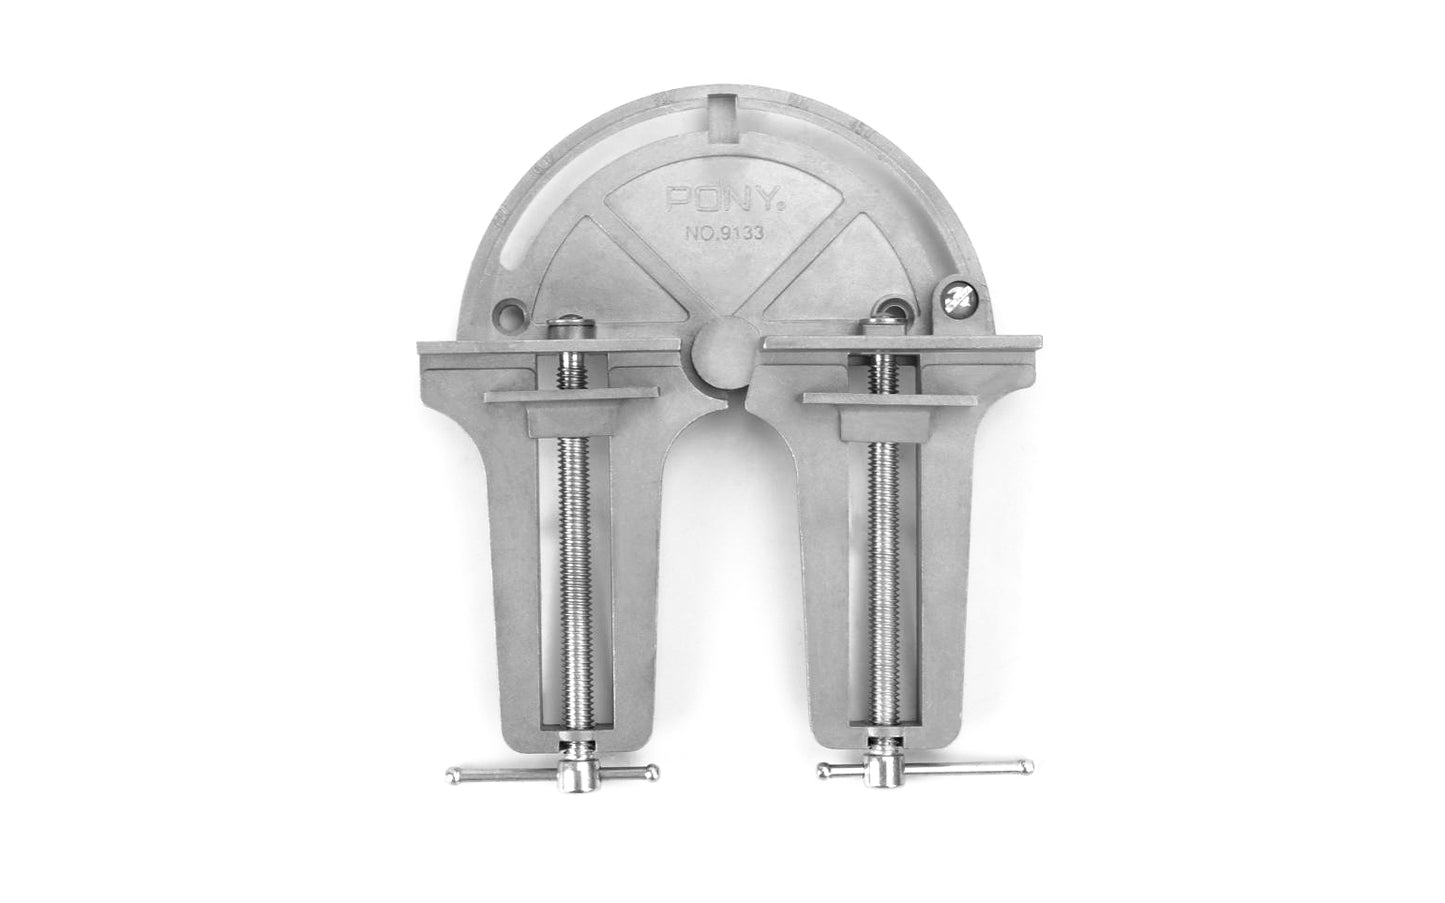 Pony / Jorgensen Clamps - Model No. 9133 ~ 3" opening max - Die-cast aluminum frame - Clamps miter & butt joint precisely at any angle - sliding jaws hold workpieces up to 3" wide - for miter correction, doweling, gluing, or nailing - Jorgensen Miter Clamp - Pony Miter Clamp - Adjusts to any angle from 0° to 180° ~ 044295913300